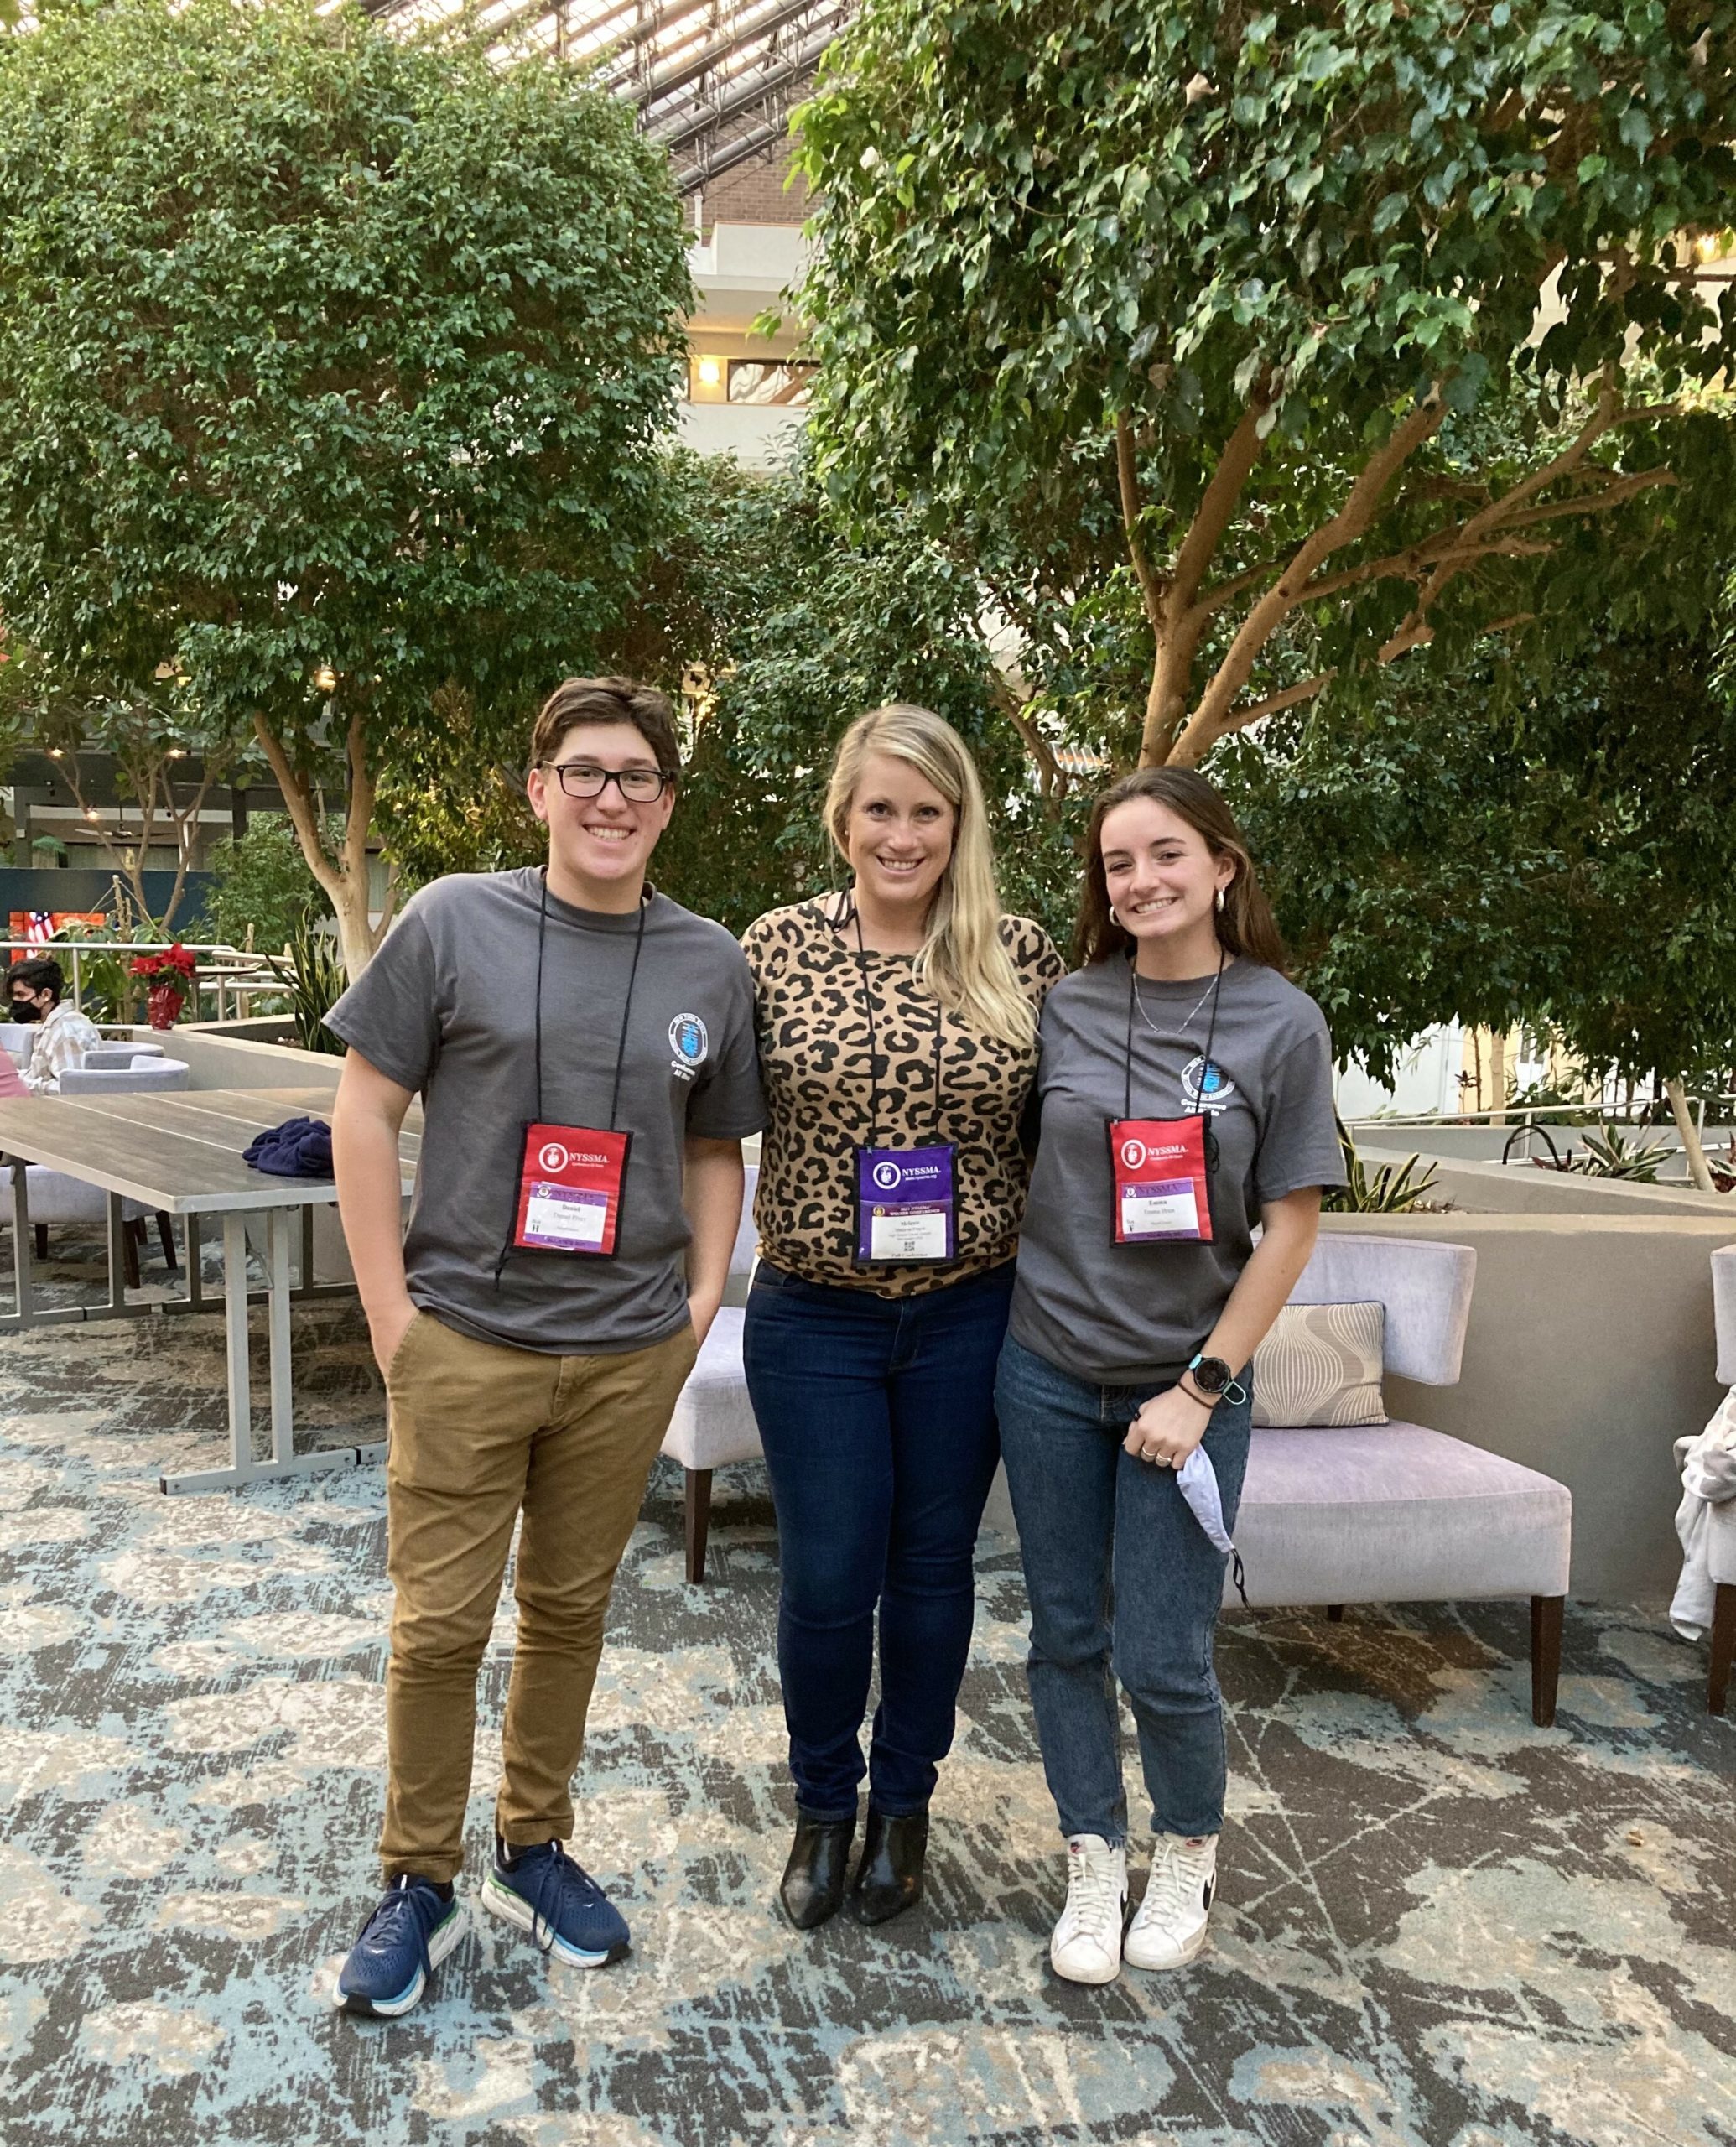 Two seniors from East Hampton High School, Emma Hren and Daniel Piver, participated in the NYSSMA All State Conference in Rochester recently, under the guidance of the school choral director, Melanie Freyre, center. The students submitted audition tapes last spring and were chosen to perform in the All- State Mixed Chorus.  Emma was chosen as one of only 20 in the Soprano I section and Daniel as only one of 20 in the Tenor 2 section in all of New York State. They traveled with Freyre to Rochester where they participated in over 18 hours of rehearsals to prepare for the concert at the historic Eastman Theatre.